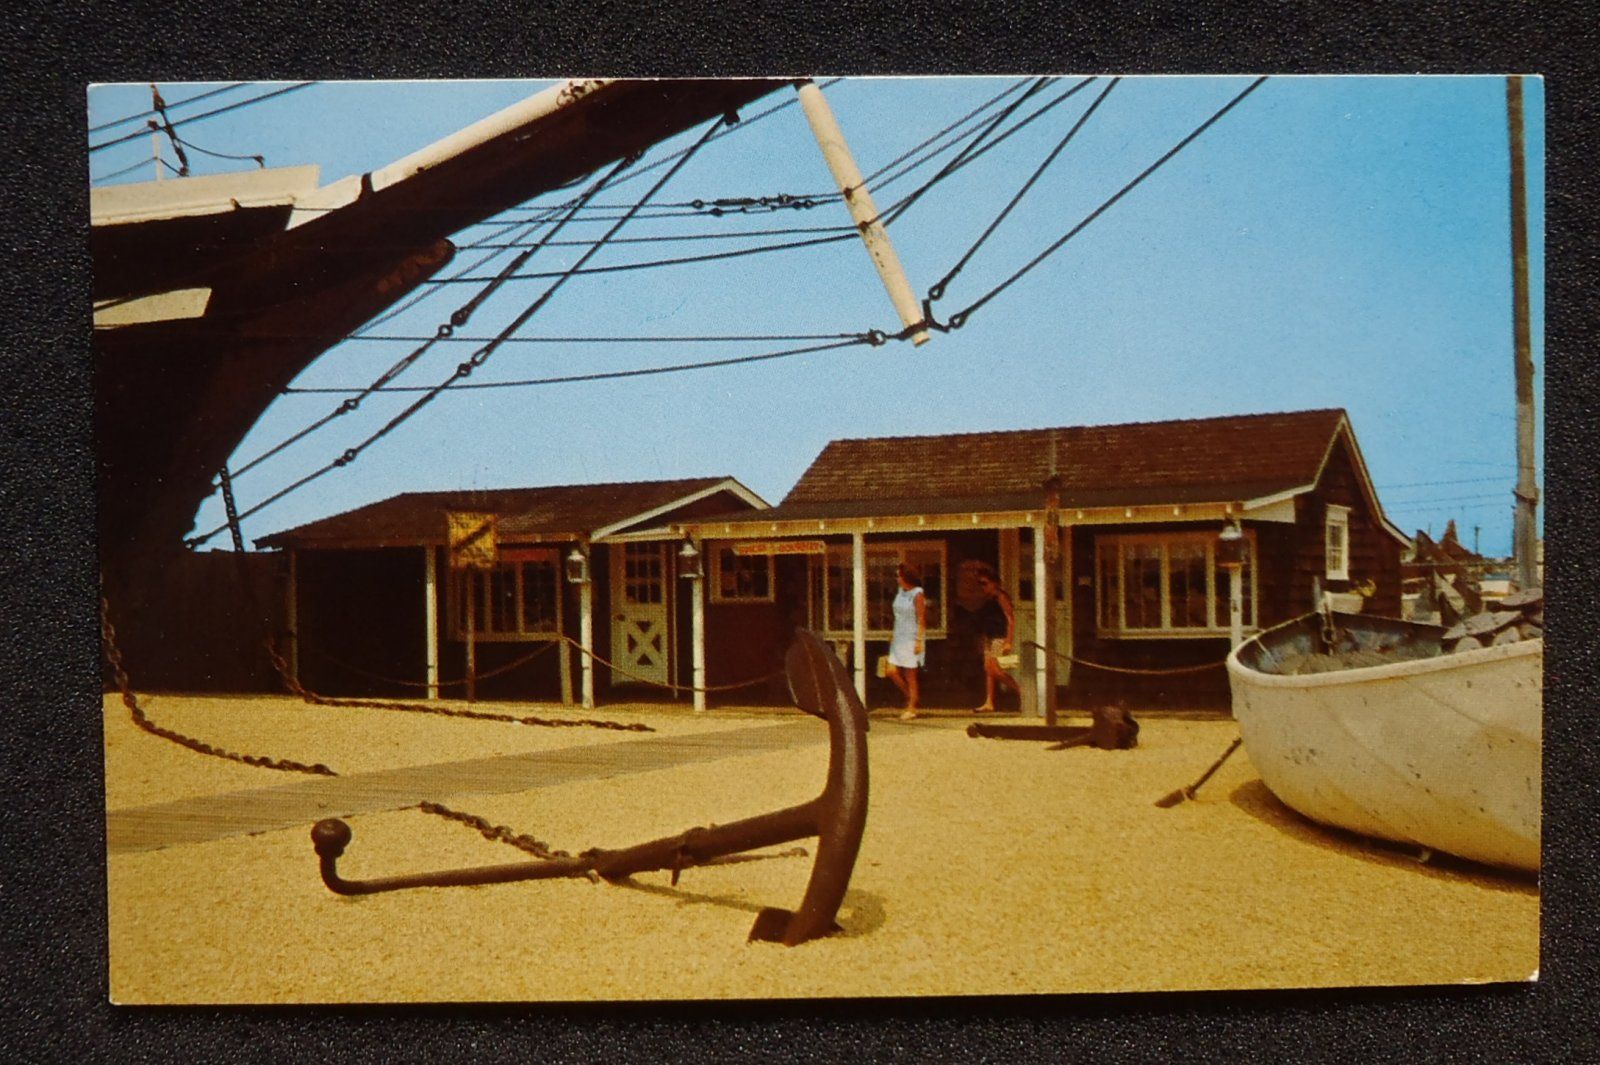   Schooner Lucy Evelyn and Gift Shops Anchors Beach Haven NJ Ocean Co PC